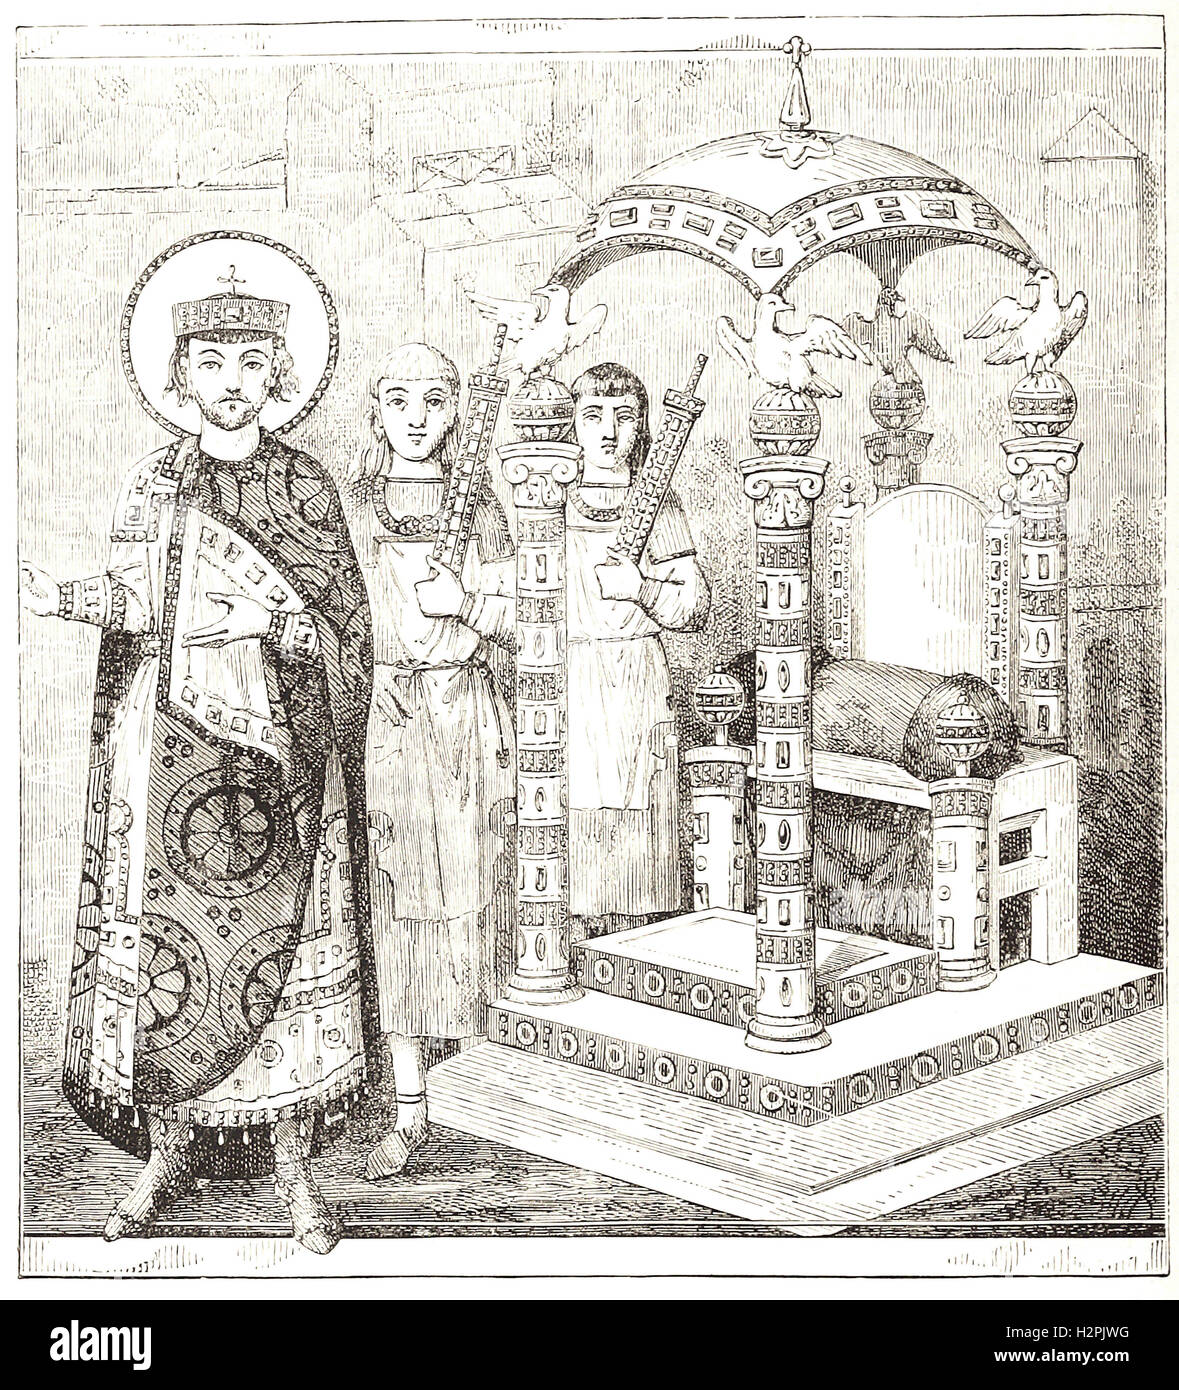 THRONE 0F THE BYZANTINE EMPERORS - from 'Cassell's Illustrated Universal History' - 1882 Stock Photo